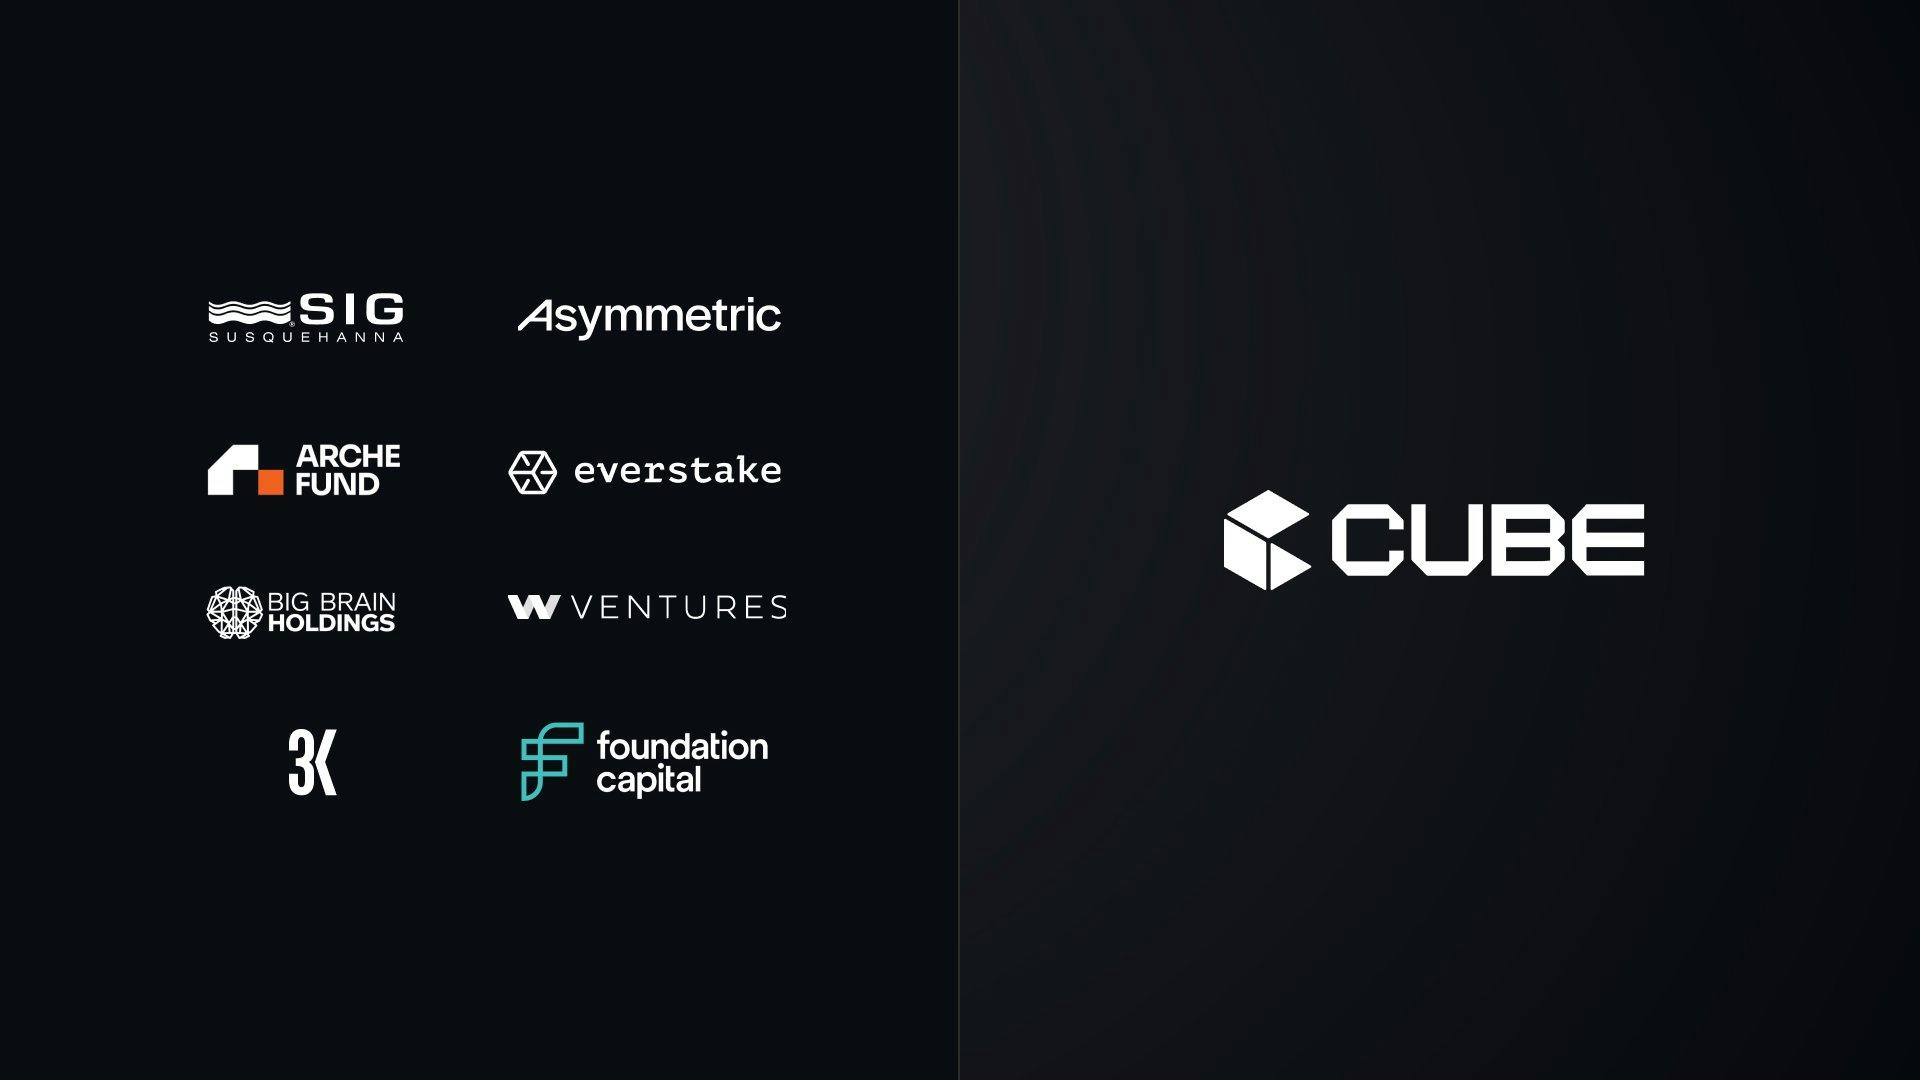 Cube Exchange raises $9 million to build digital asset exchange that protects traders from founder risk.